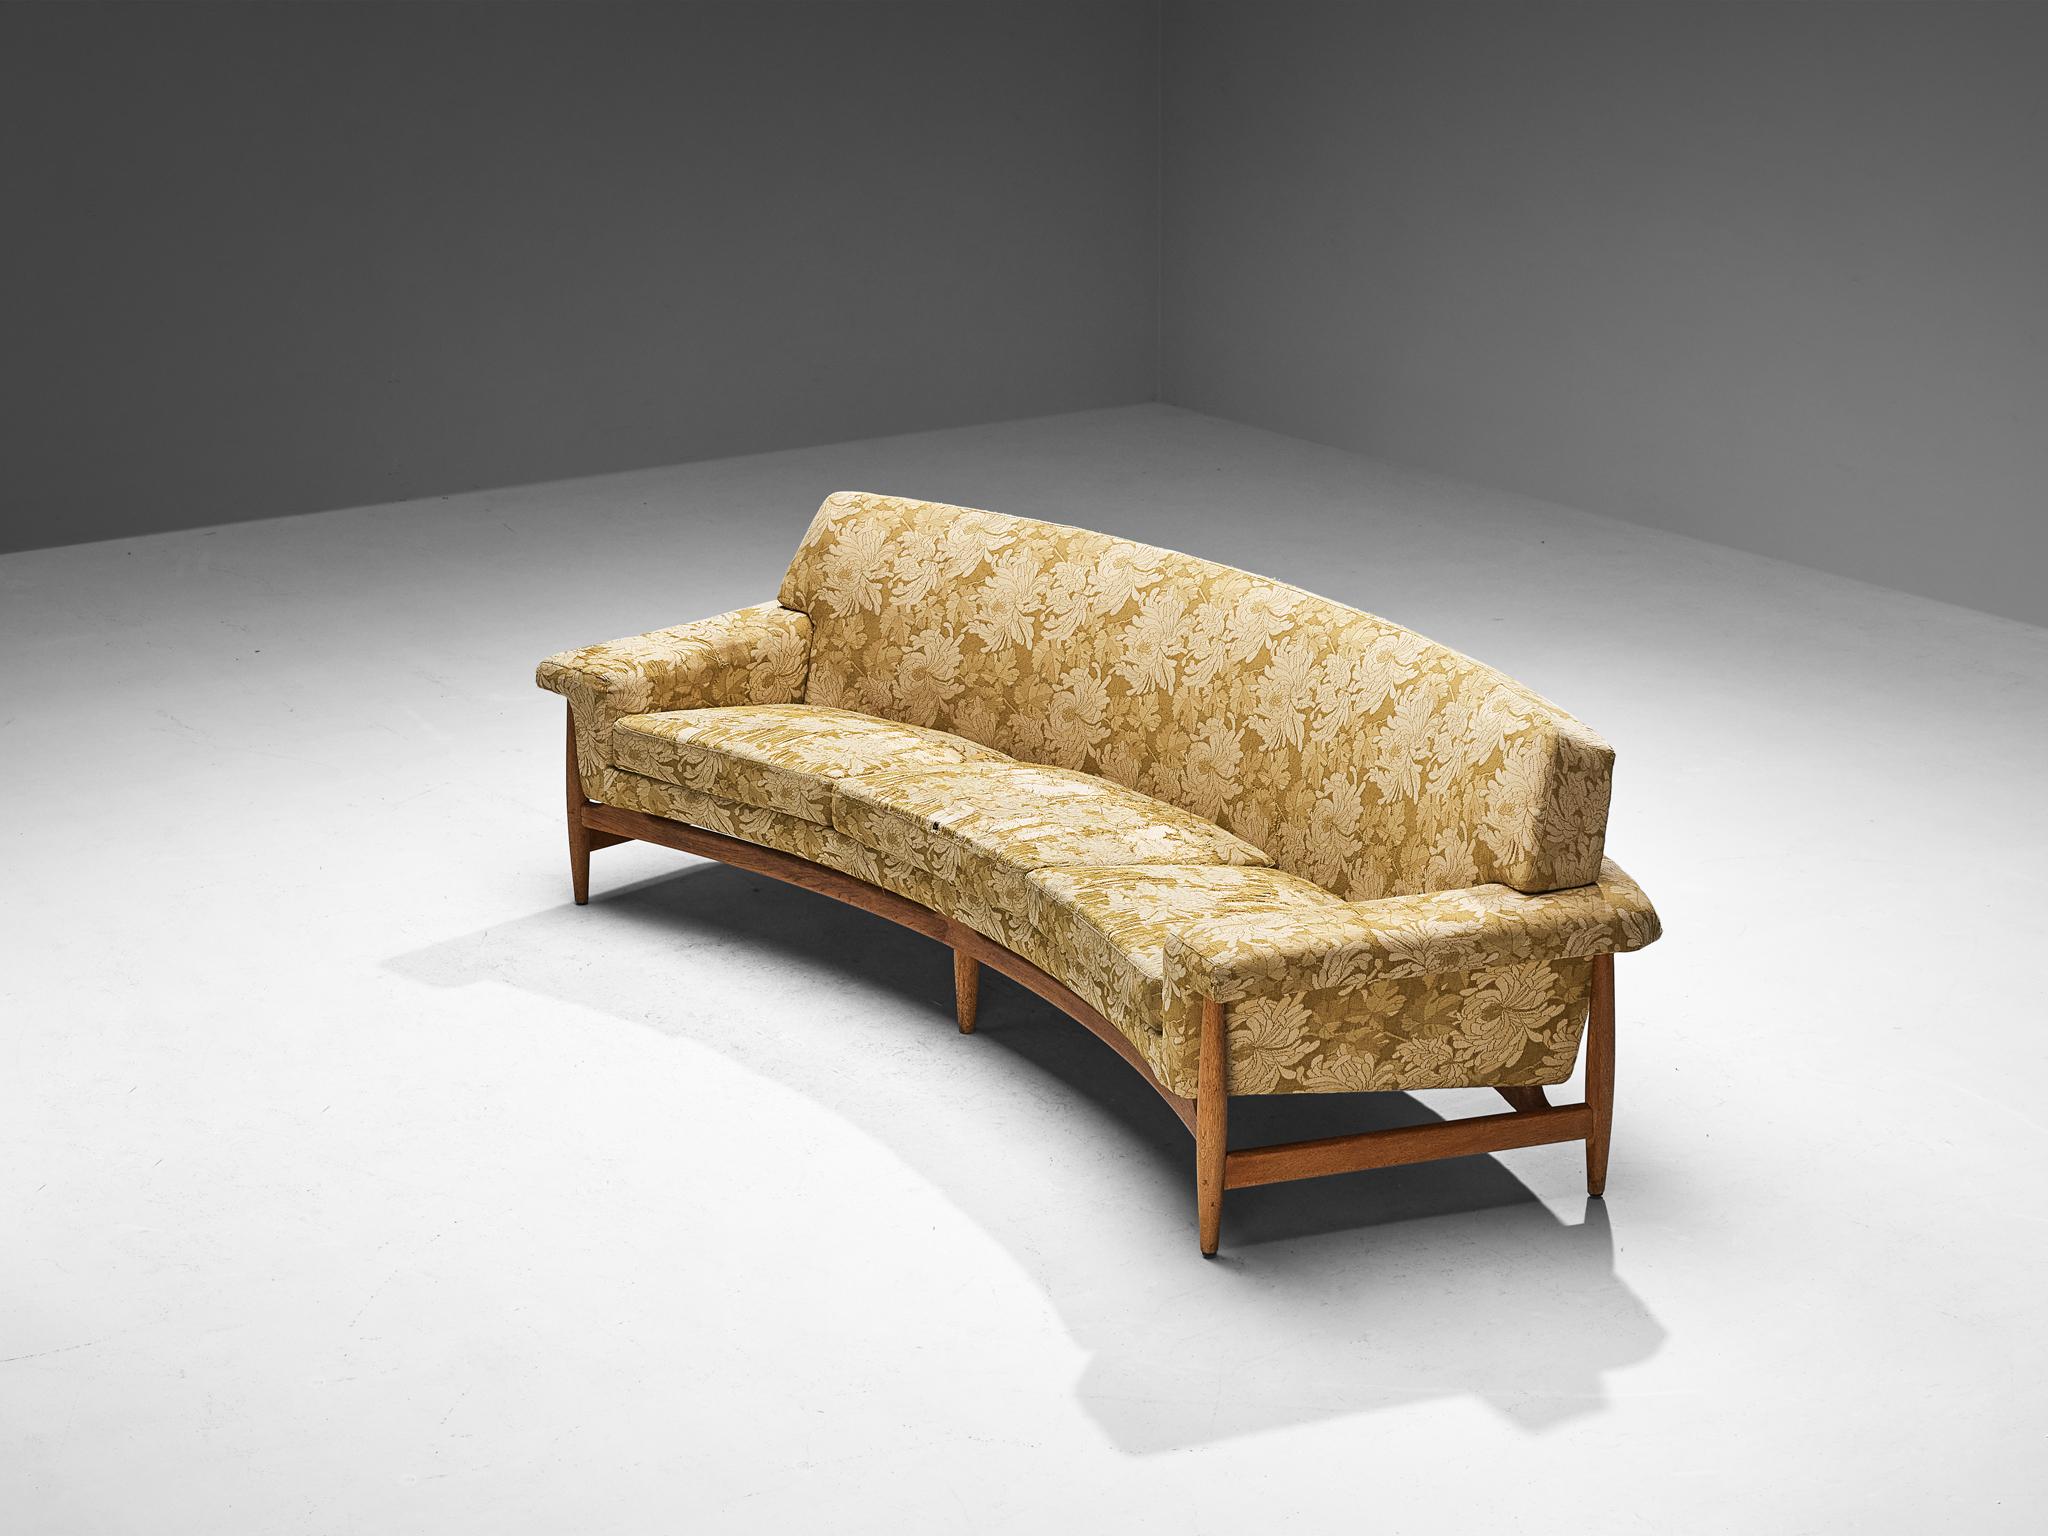 Johannes Andersen for Trensum Møbelfabrik, 'TV Night' sofa, fabric, teak, Sweden, 1958

In 1958, Johannes Andersen conceived a remarkable sofa for Trensum Møbelfabrik, a creation that received a whimsical name, 